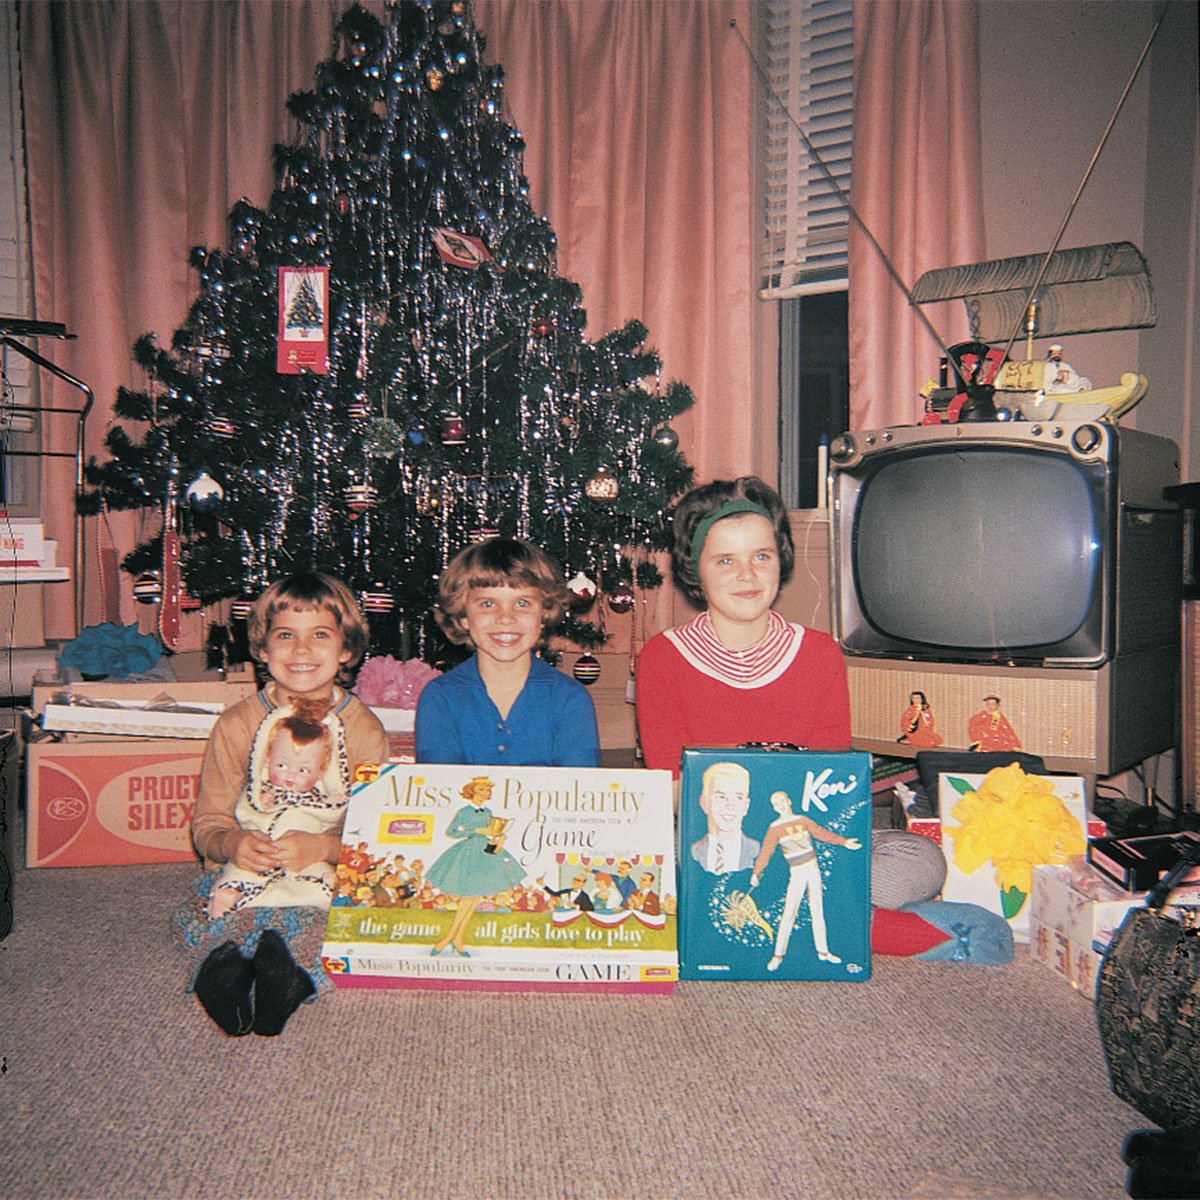 christmas morning 1978 - Progi Silex Miss Popularity jame the game all girls love to play MissTopolarity